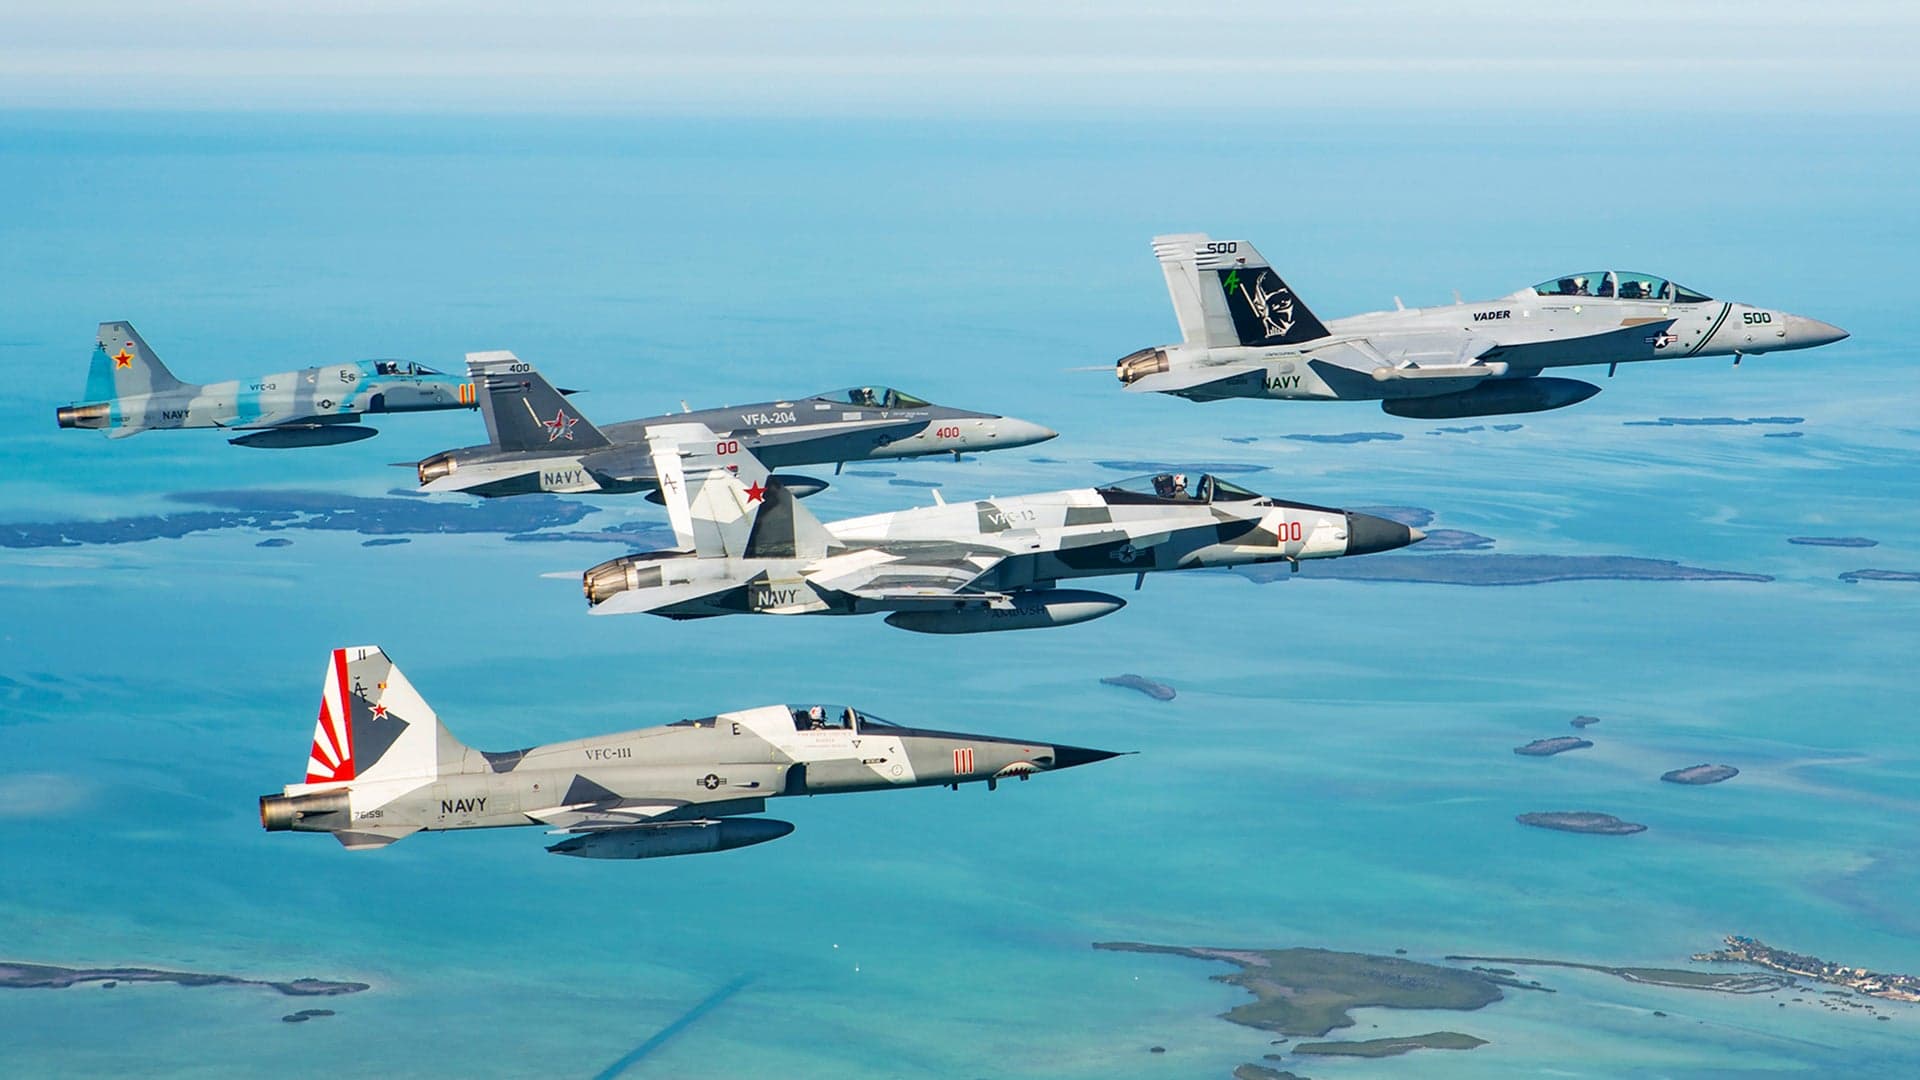 Check Out This Rare Formation Of Navy Reserve Fighters Over Gorgeous Key West